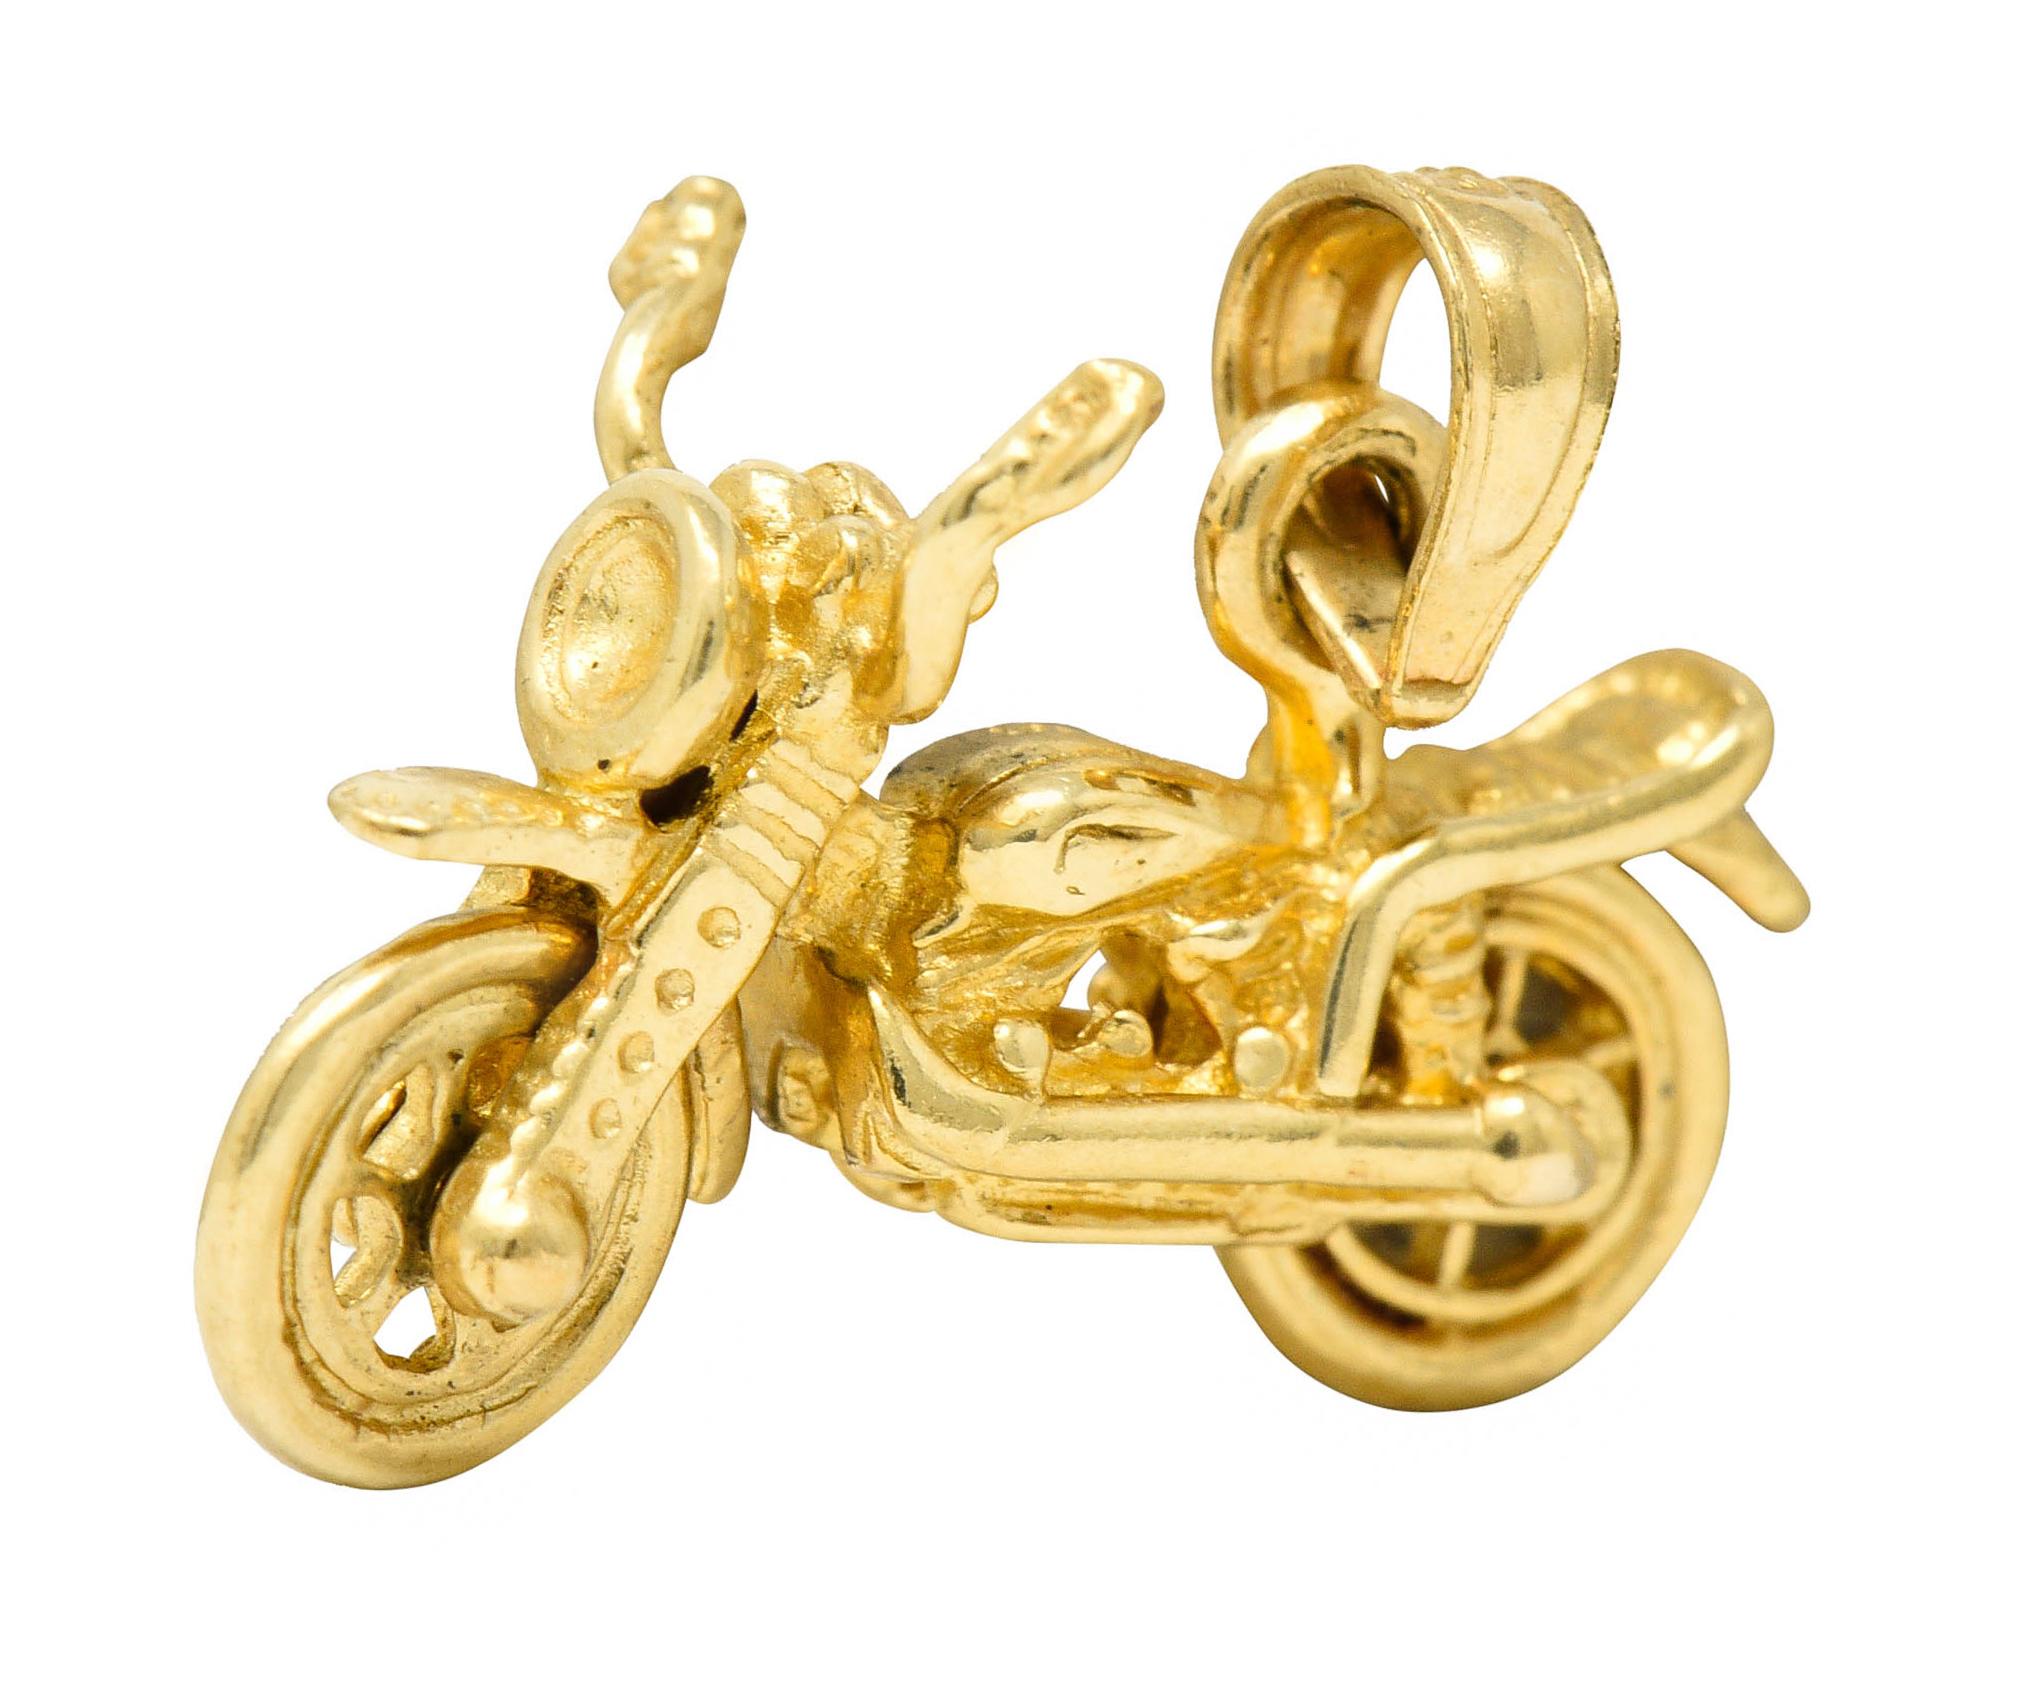 Charm is designed as a highly rendered motorcycle

With pivoting handle bars and spinning wheels

Completed by bale

With maker's mark and stamped 14K for 14 karat gold

Circa: 1950s

Measures: 5/8 x 3/4 inch

Total weight: 2.4 grams

Gleaming.